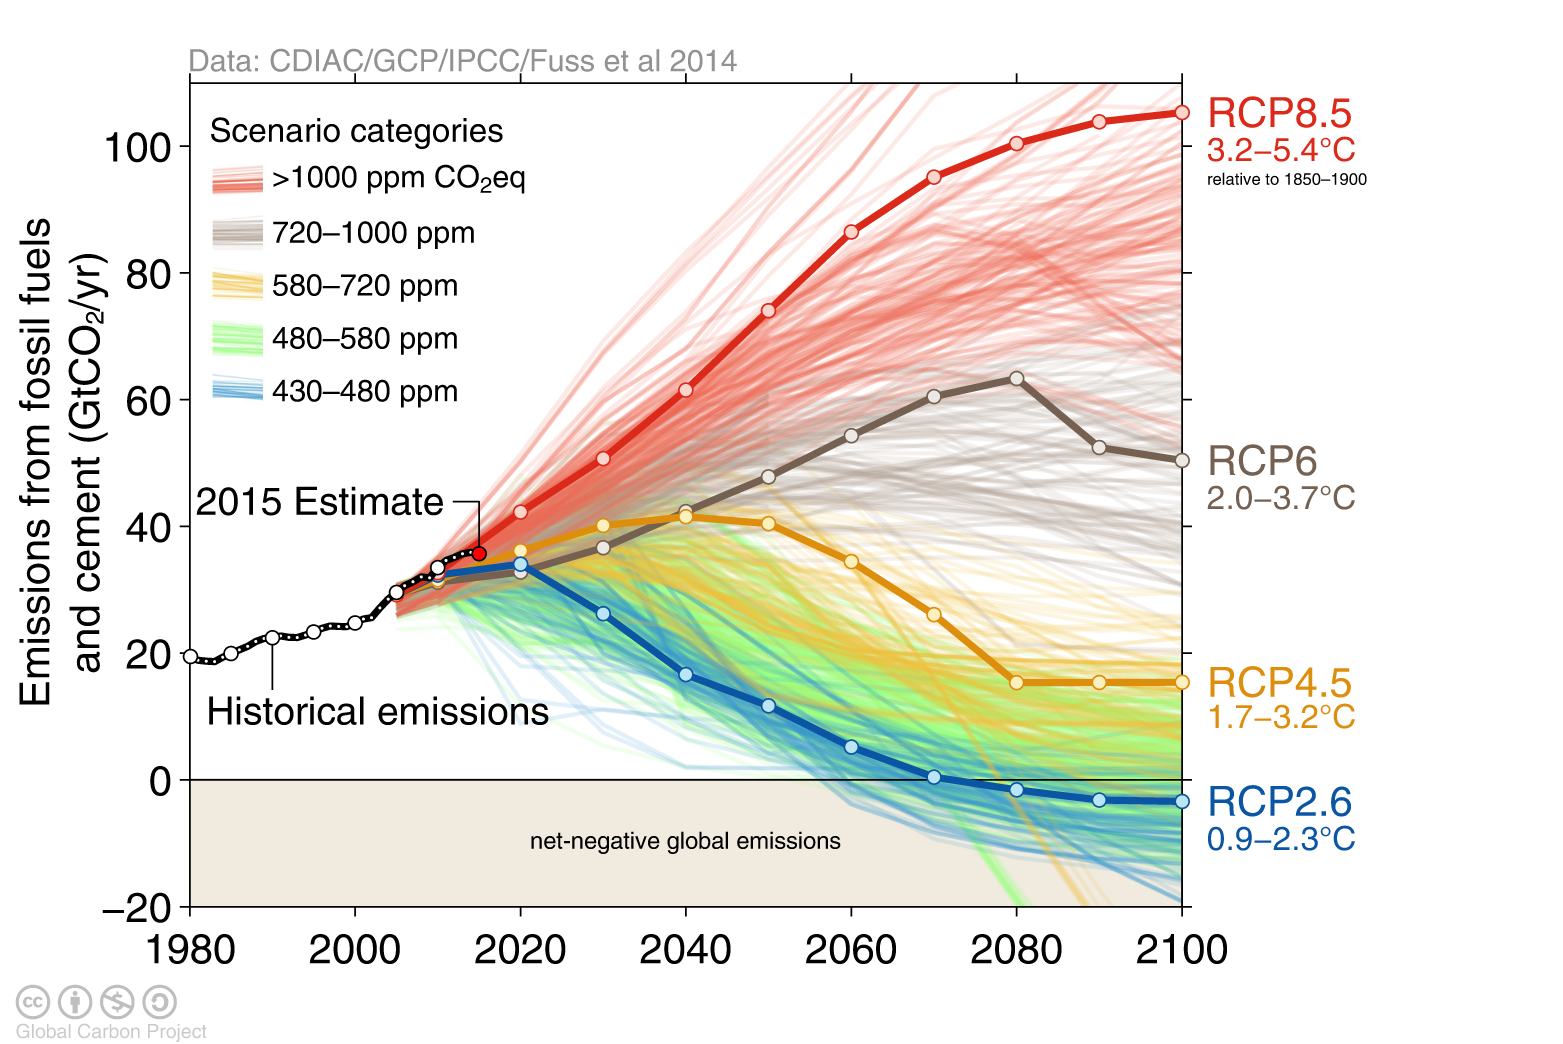 The Intergovernmental Panel on Climate Change, or IPCC, relies on scenarios like these to see how different combinations of technologies and government regulations will affect global climate until 2100. Graphic: Global Carbon Project